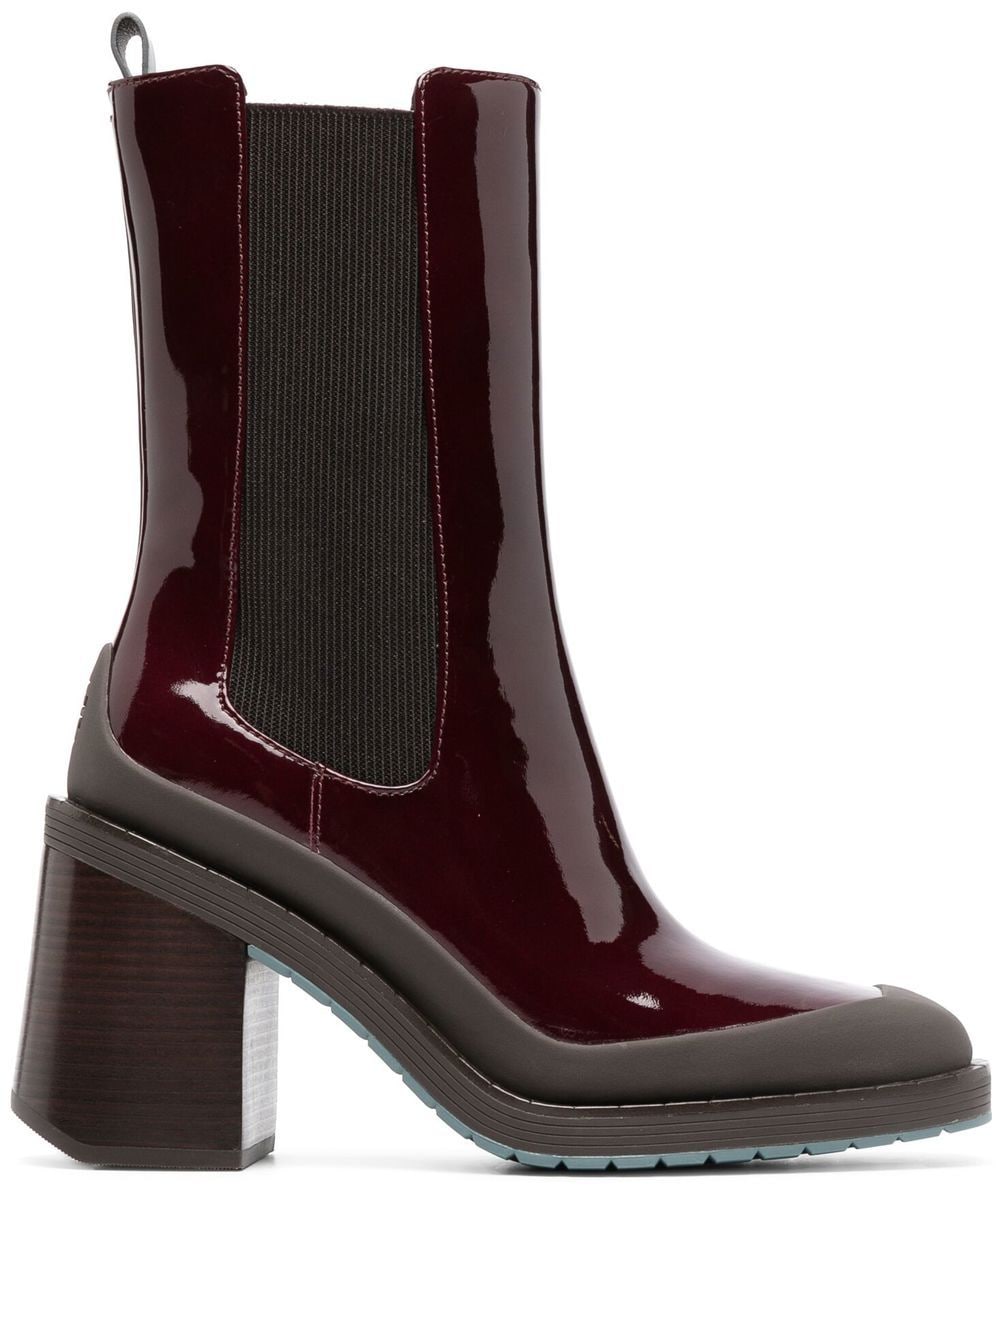 Tory Burch Expedition Chelsea Boots - Farfetch